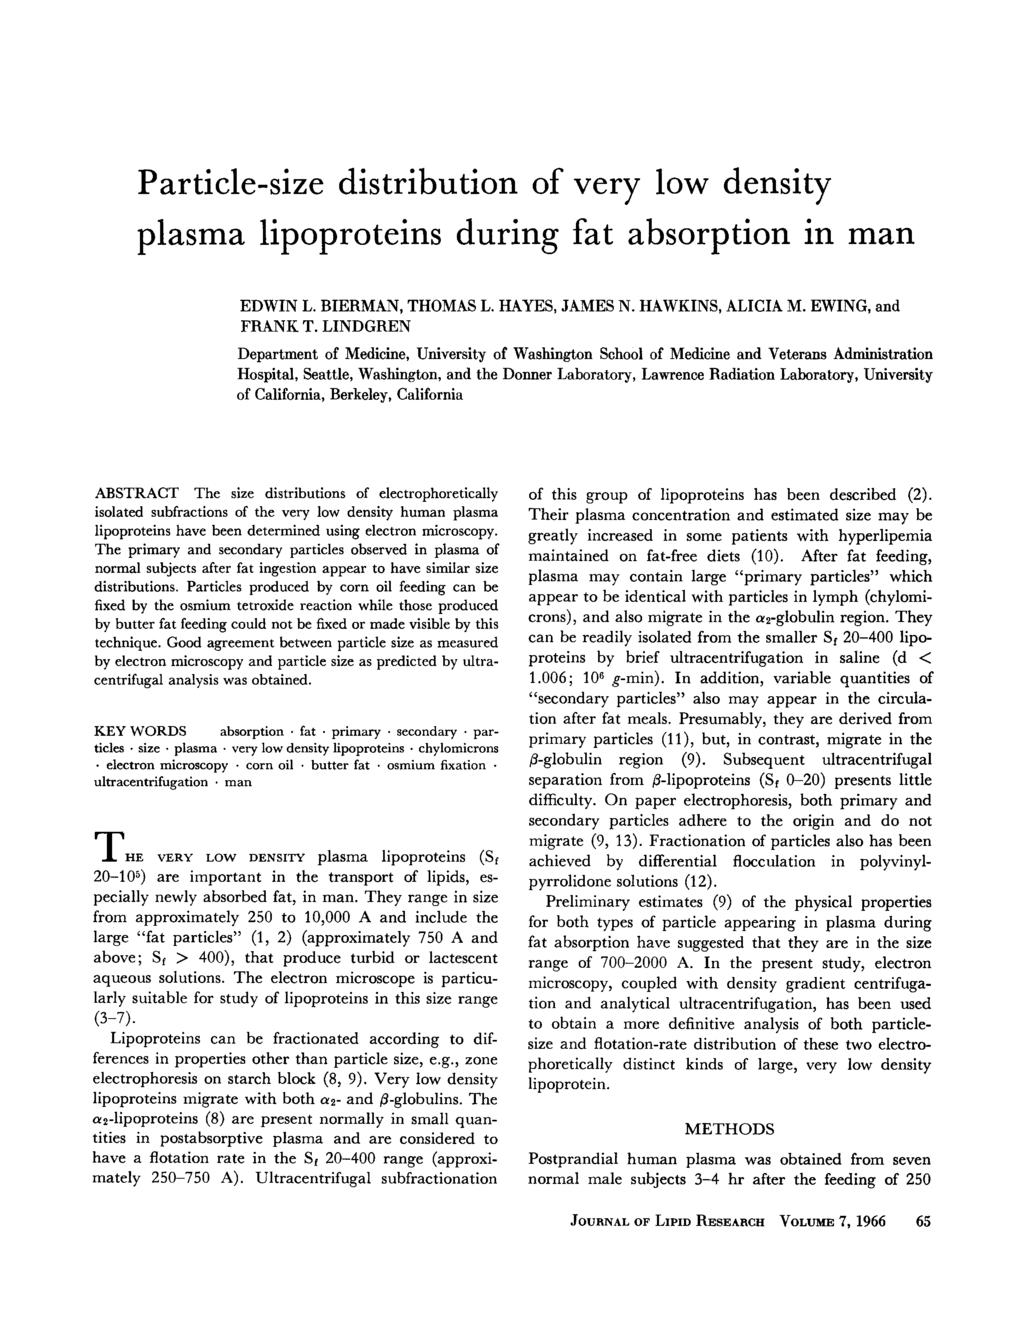 Prticle-size distriution of very low density plsm lipoproteins during ft sorption in mn EDWIN L. BIERMAN, THOMAS L. HAYES, JAMES N. HAWKINS, ALICIA M. EWING, nd FRANK T.